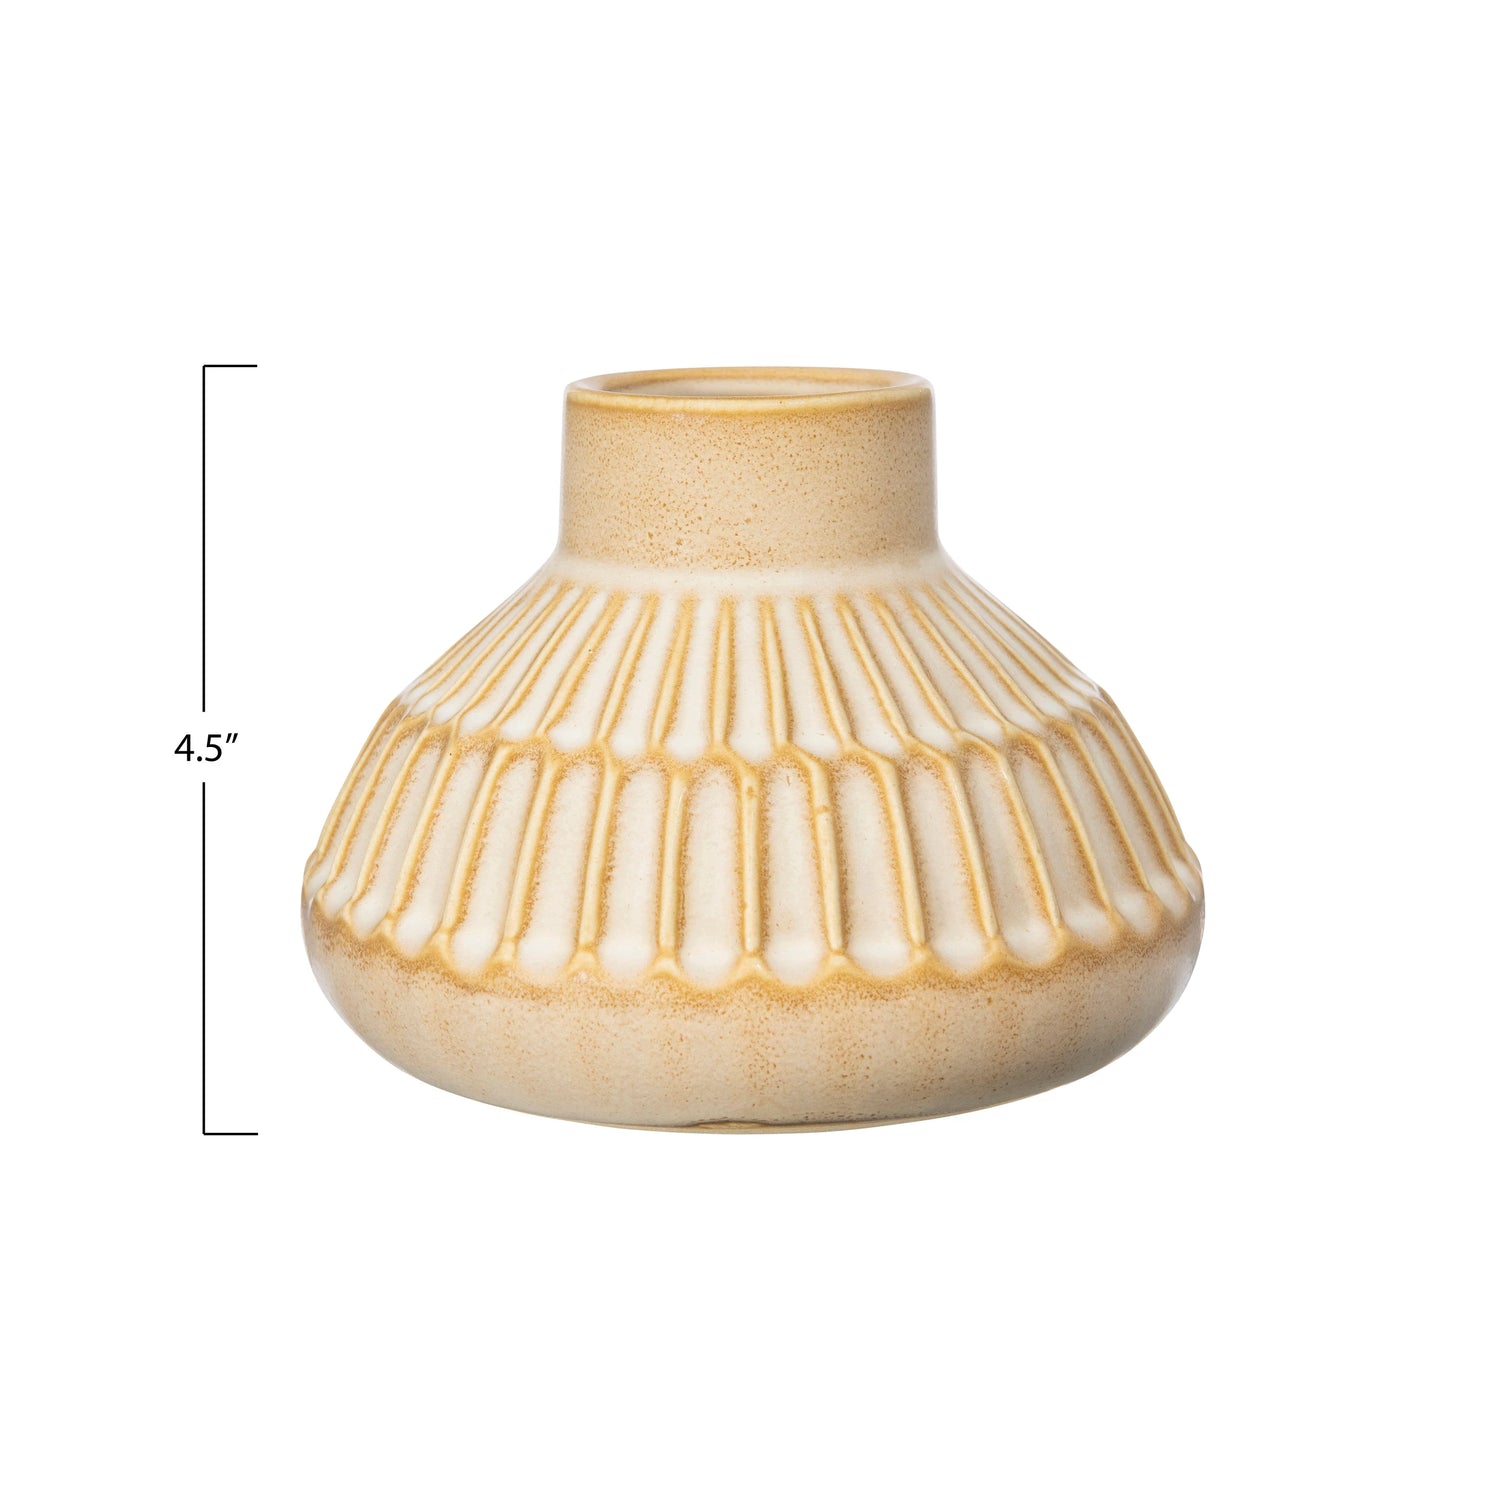 Stoneware Vase with Vertical Stripes